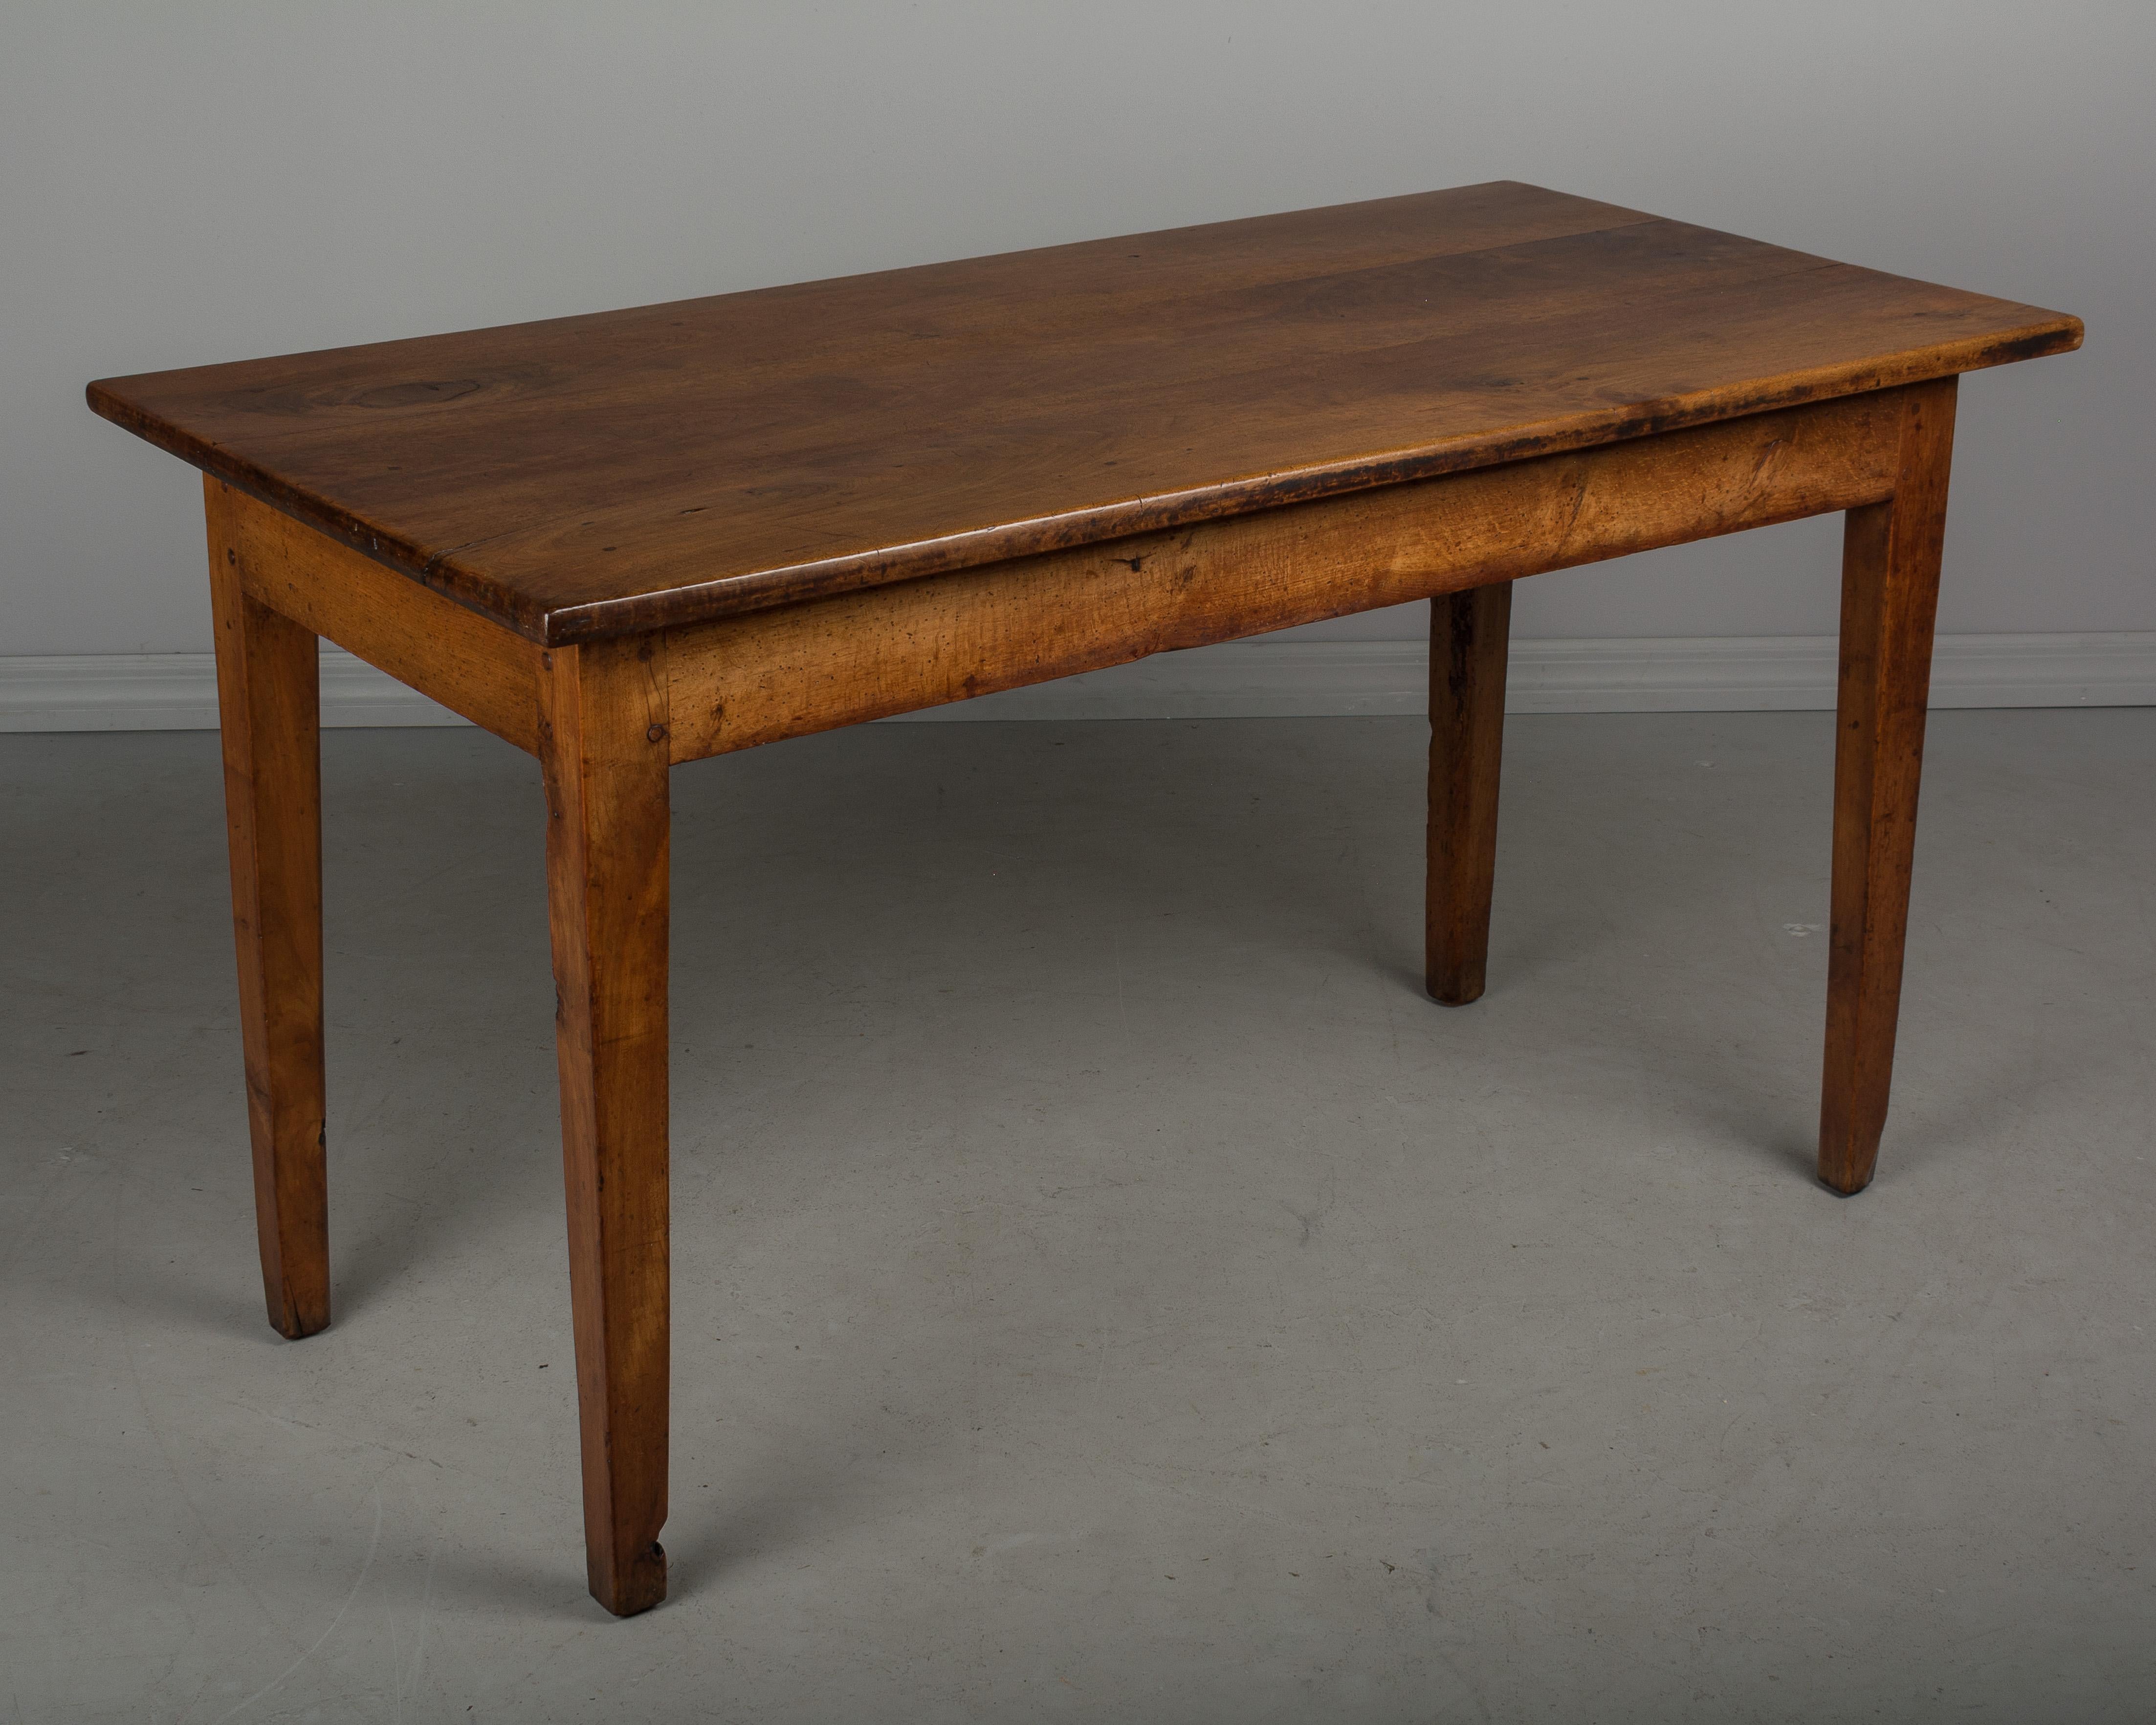 A late 19th century French farm table with a top made of three planks of solid walnut. The base has tapered legs and is made of cherrywood. Sturdy and well made using pegged construction. Small in size, this table was likely used in a kitchen or